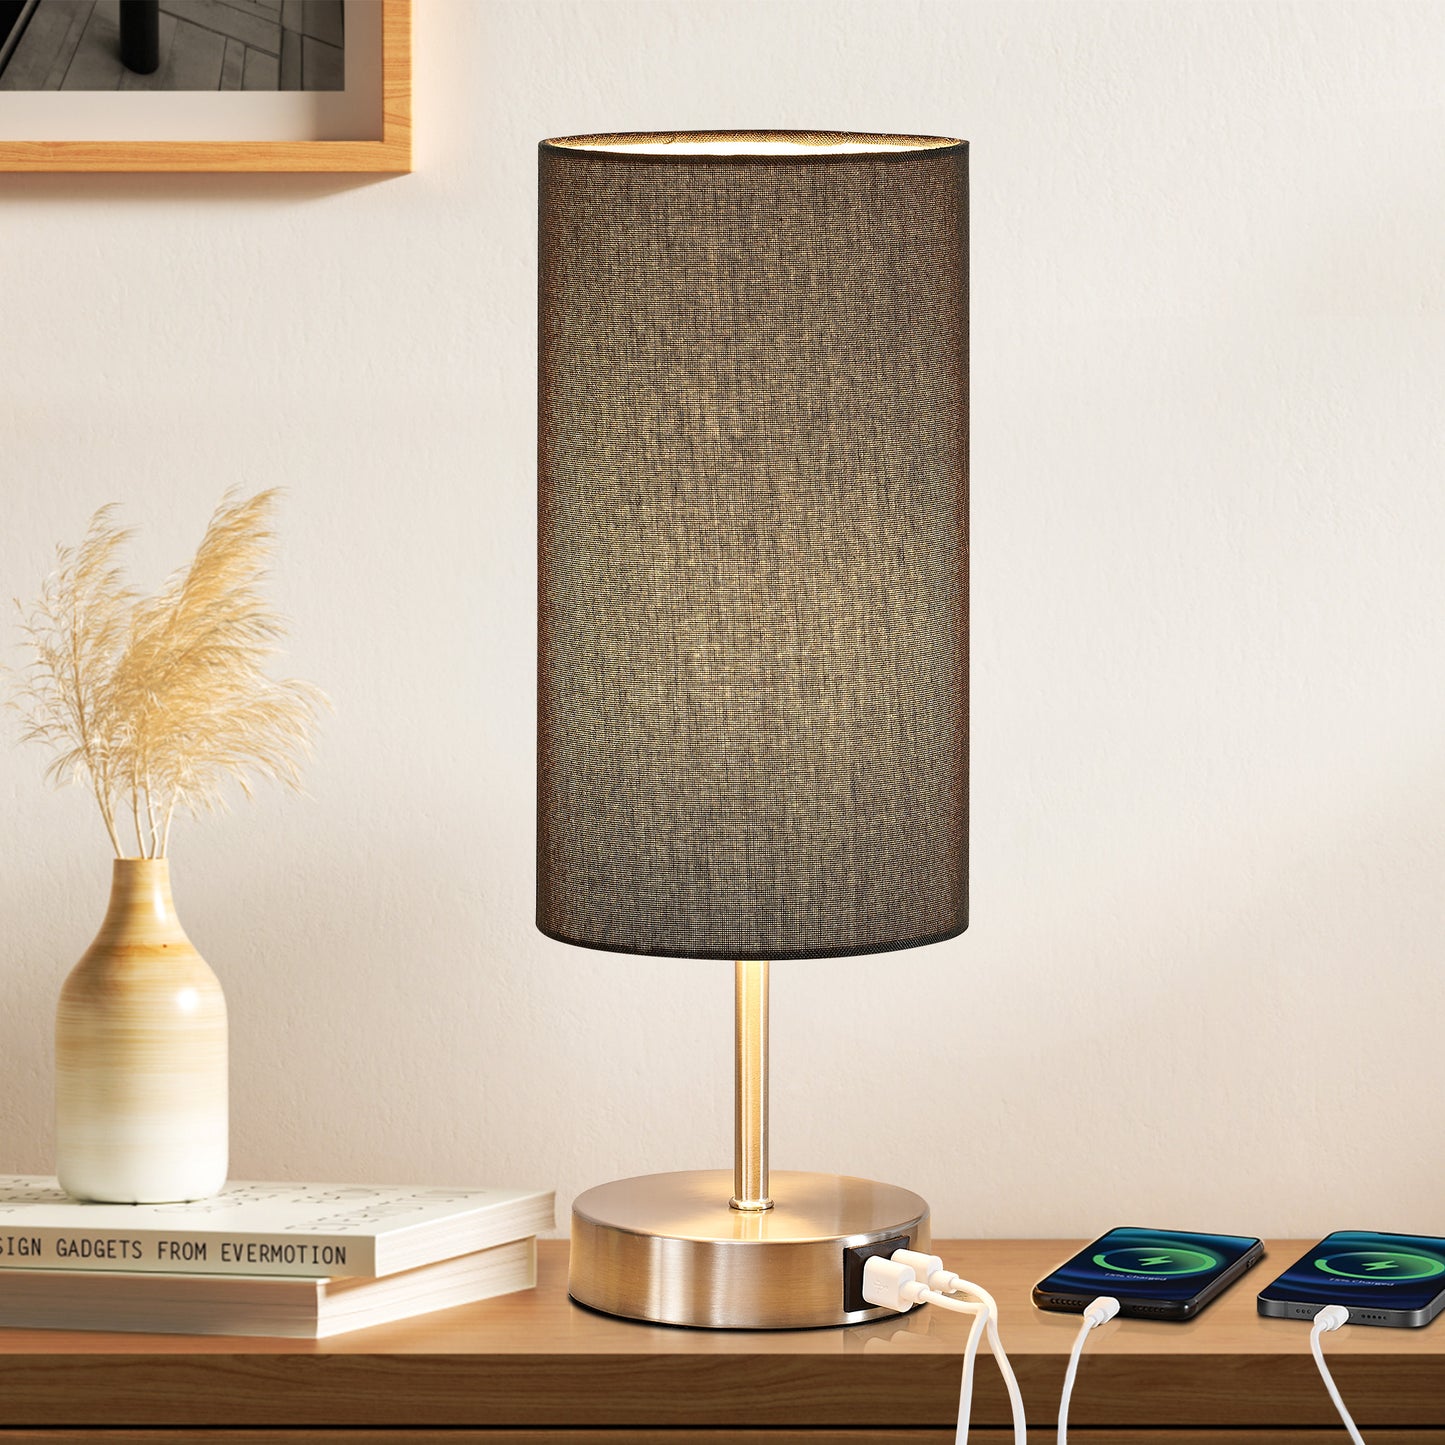 Touch-Sensitive Table Lamp Elegance, Convenience & Dual USB Charging Ports & Touch-sensitive Dimming Switch